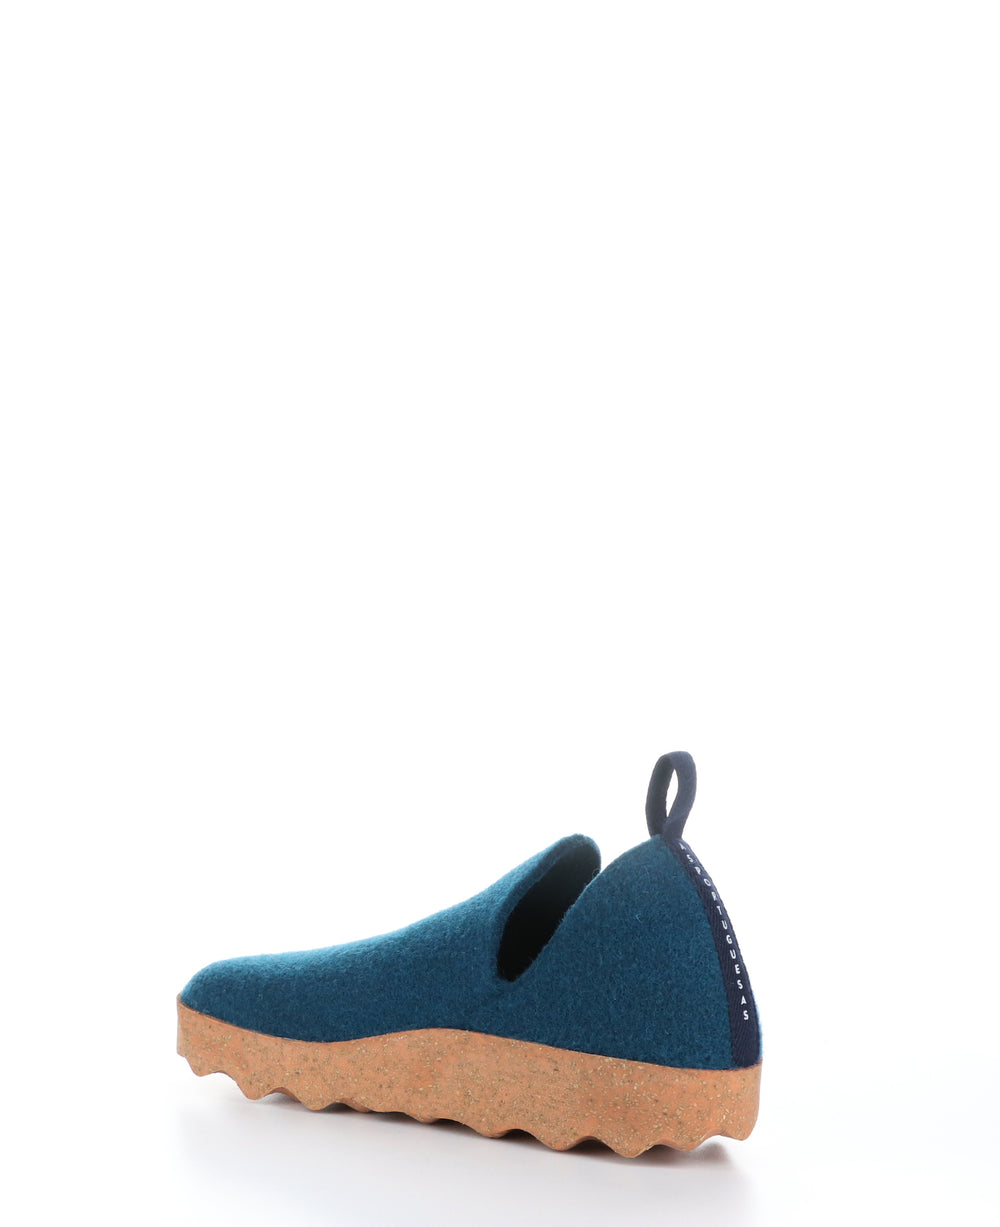 CITY Peacock Blue Round Toe Shoes